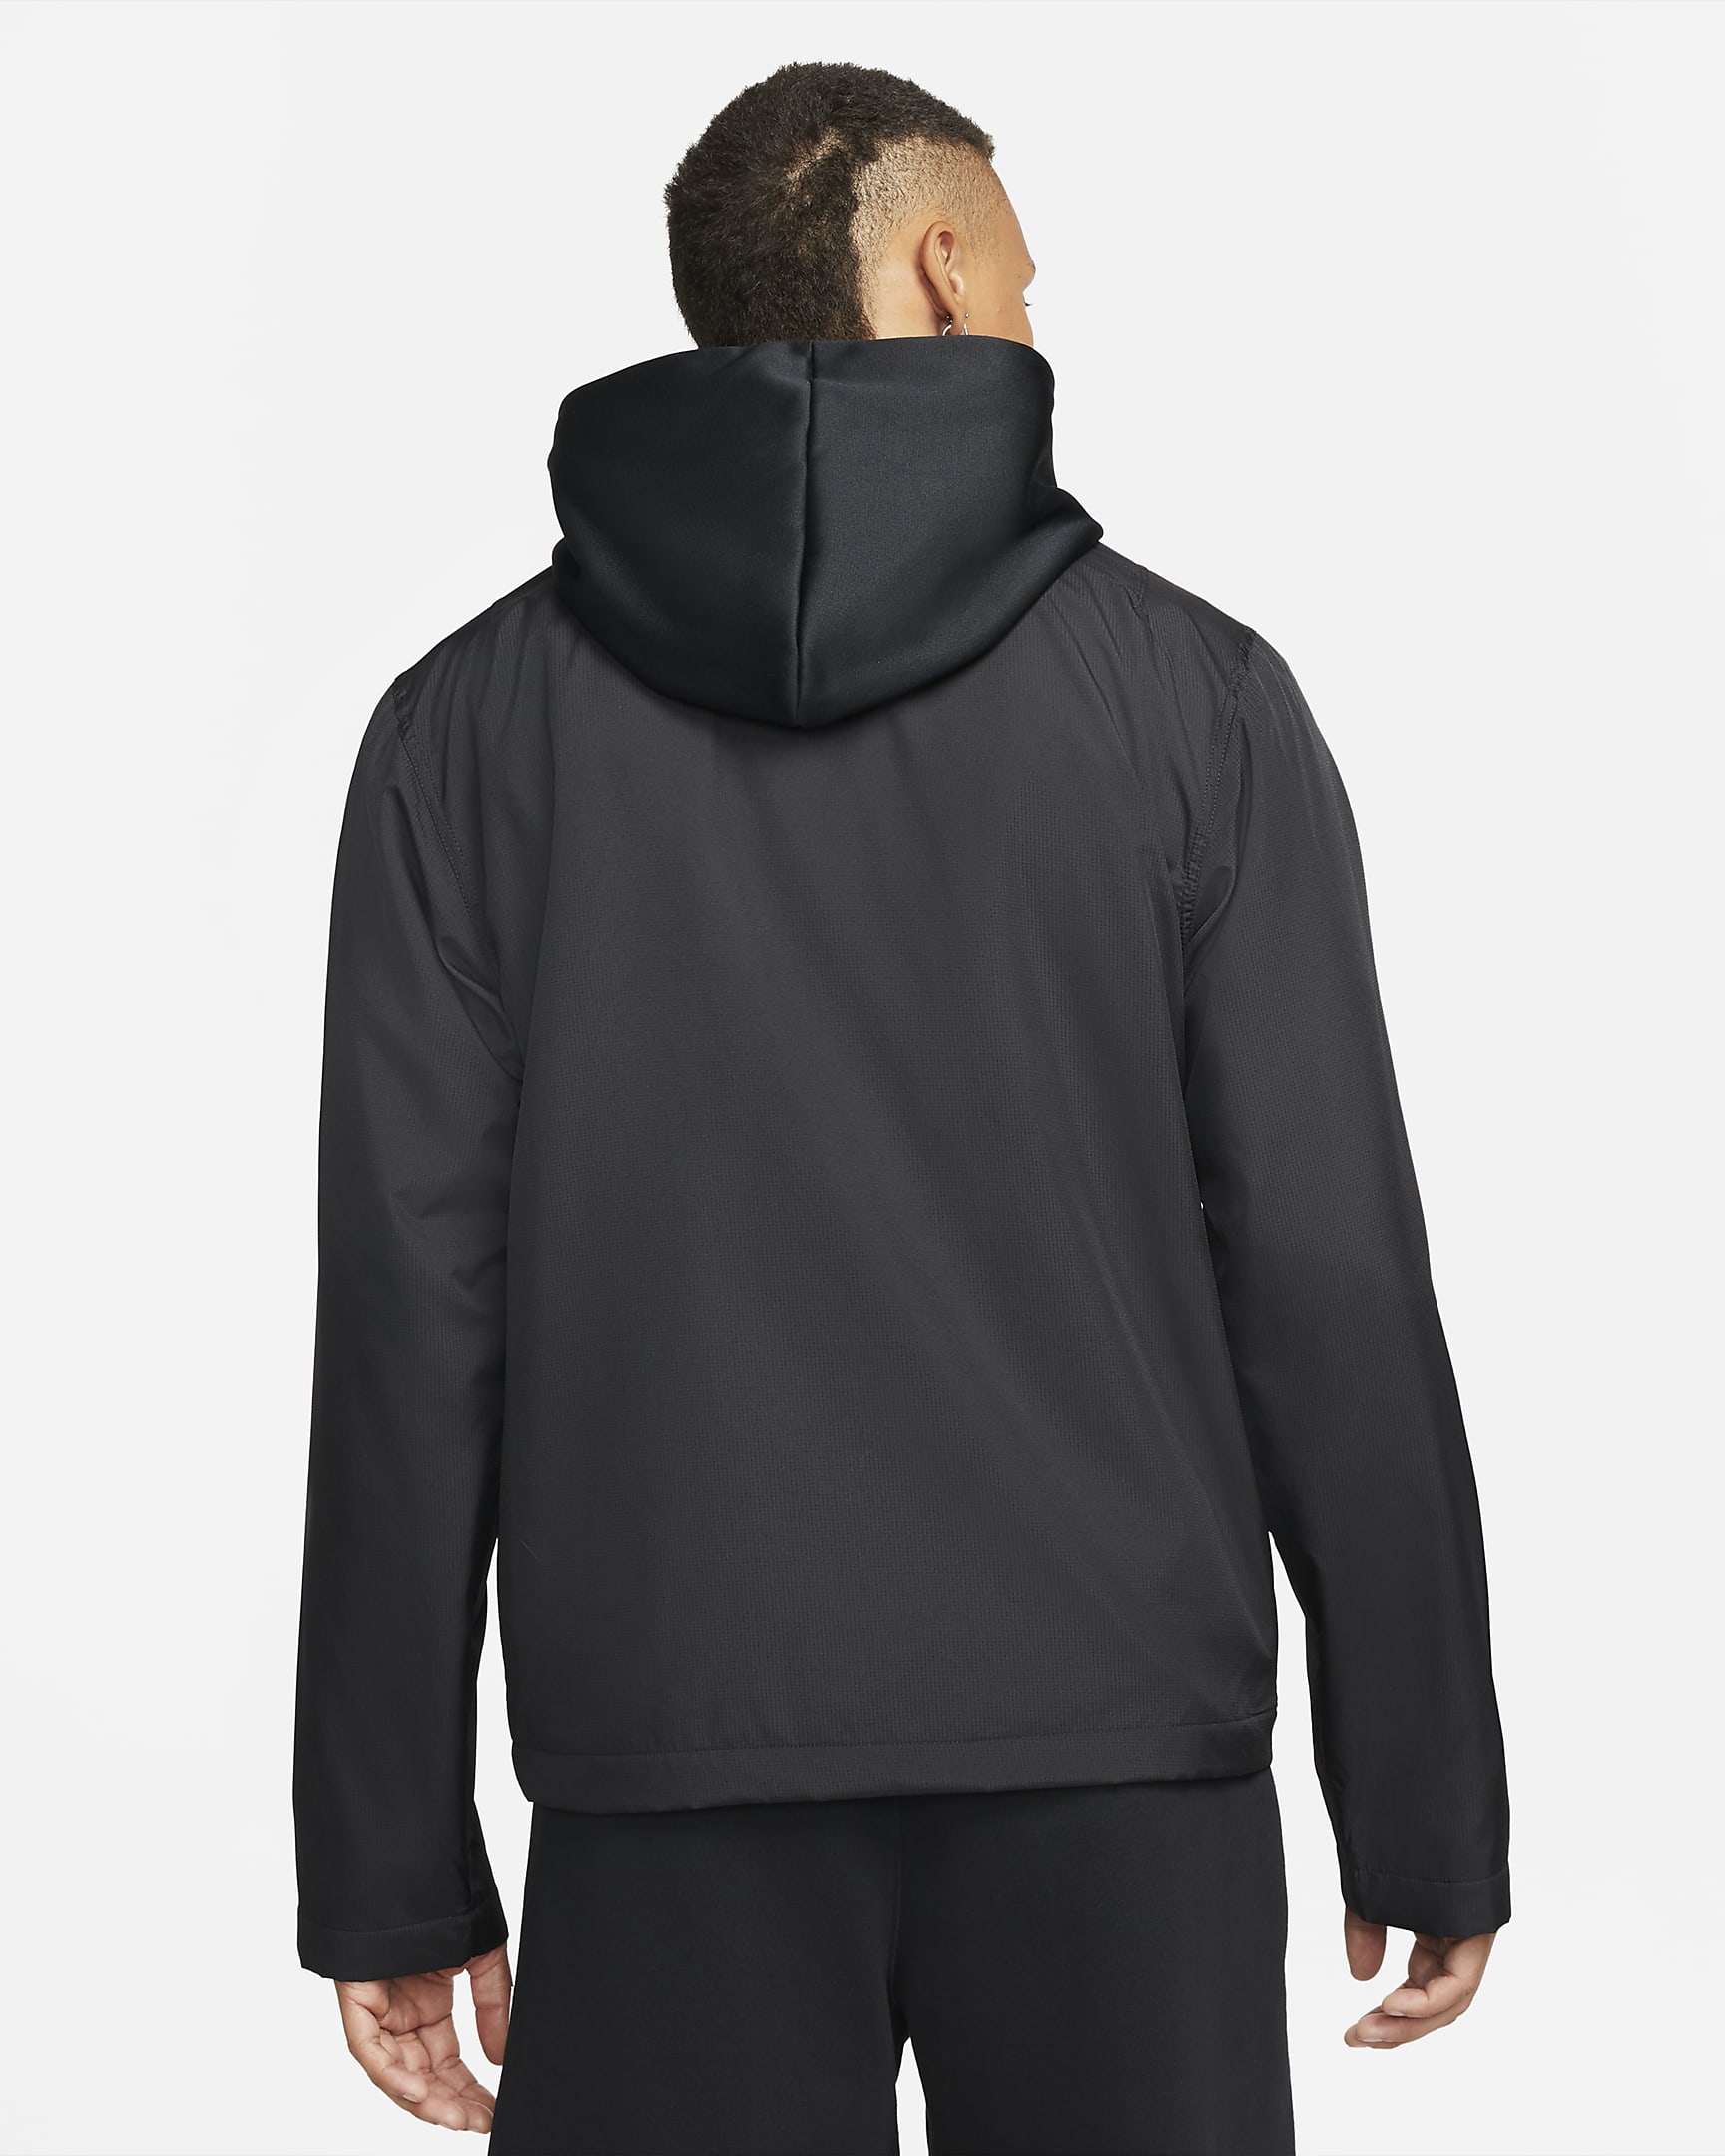 Nike Therma-FIT Standard Issue Men's Basketball Winterized Hoodie. Nike.com